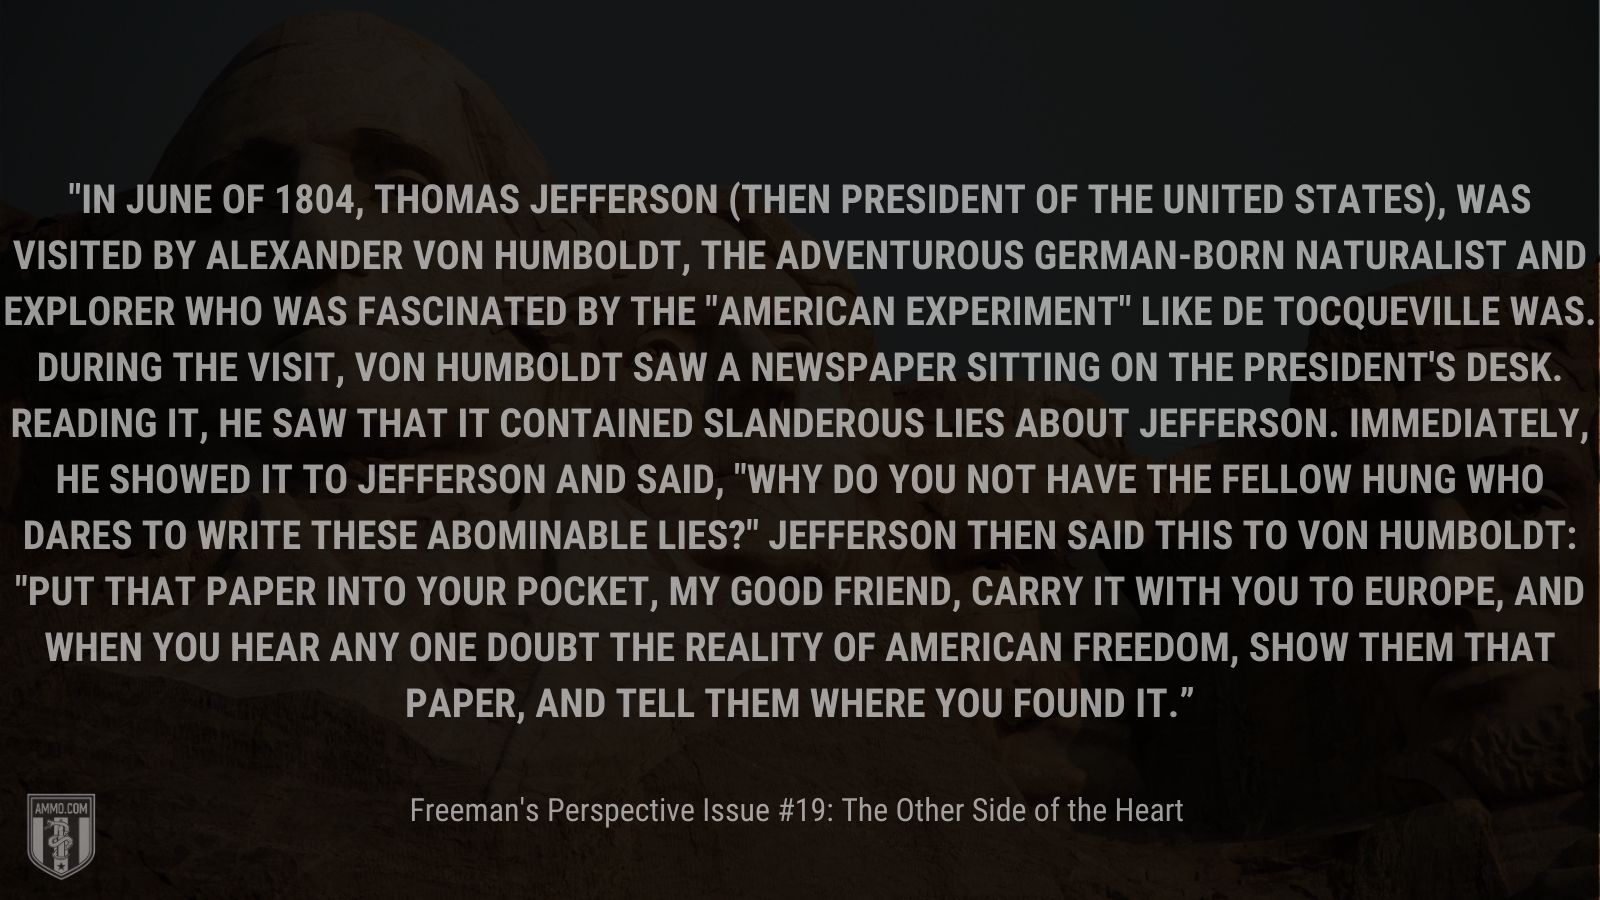 “In June of 1804, Thomas Jefferson” - Freemans Perspective Issue 19